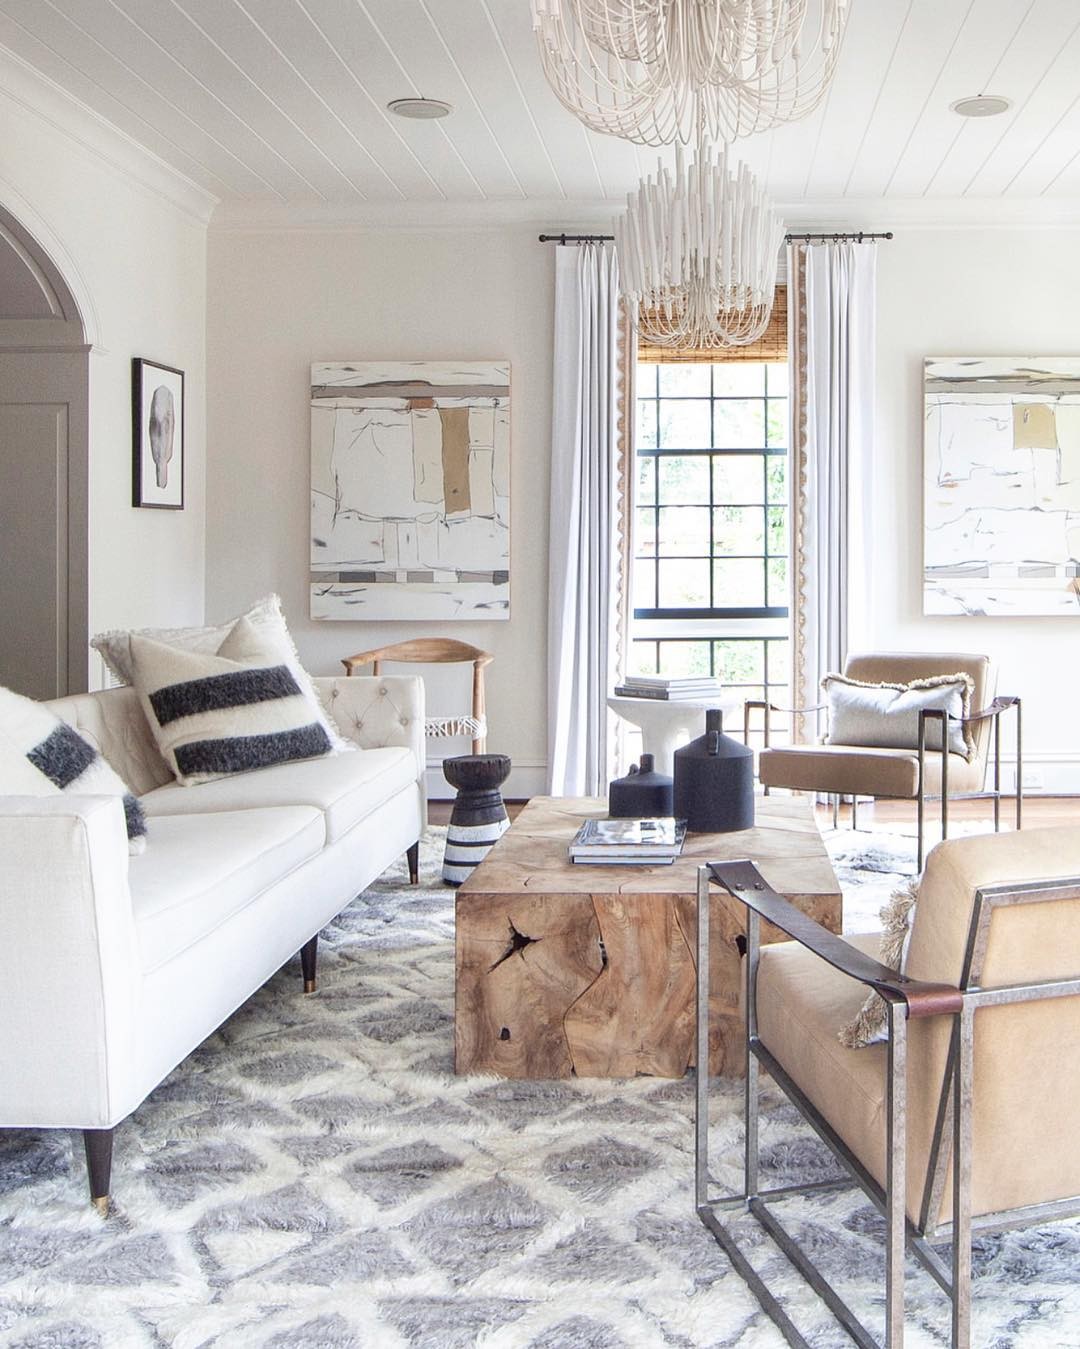 Transitional Style Living Room: How to Elevate Your Decor with Elegant Accents